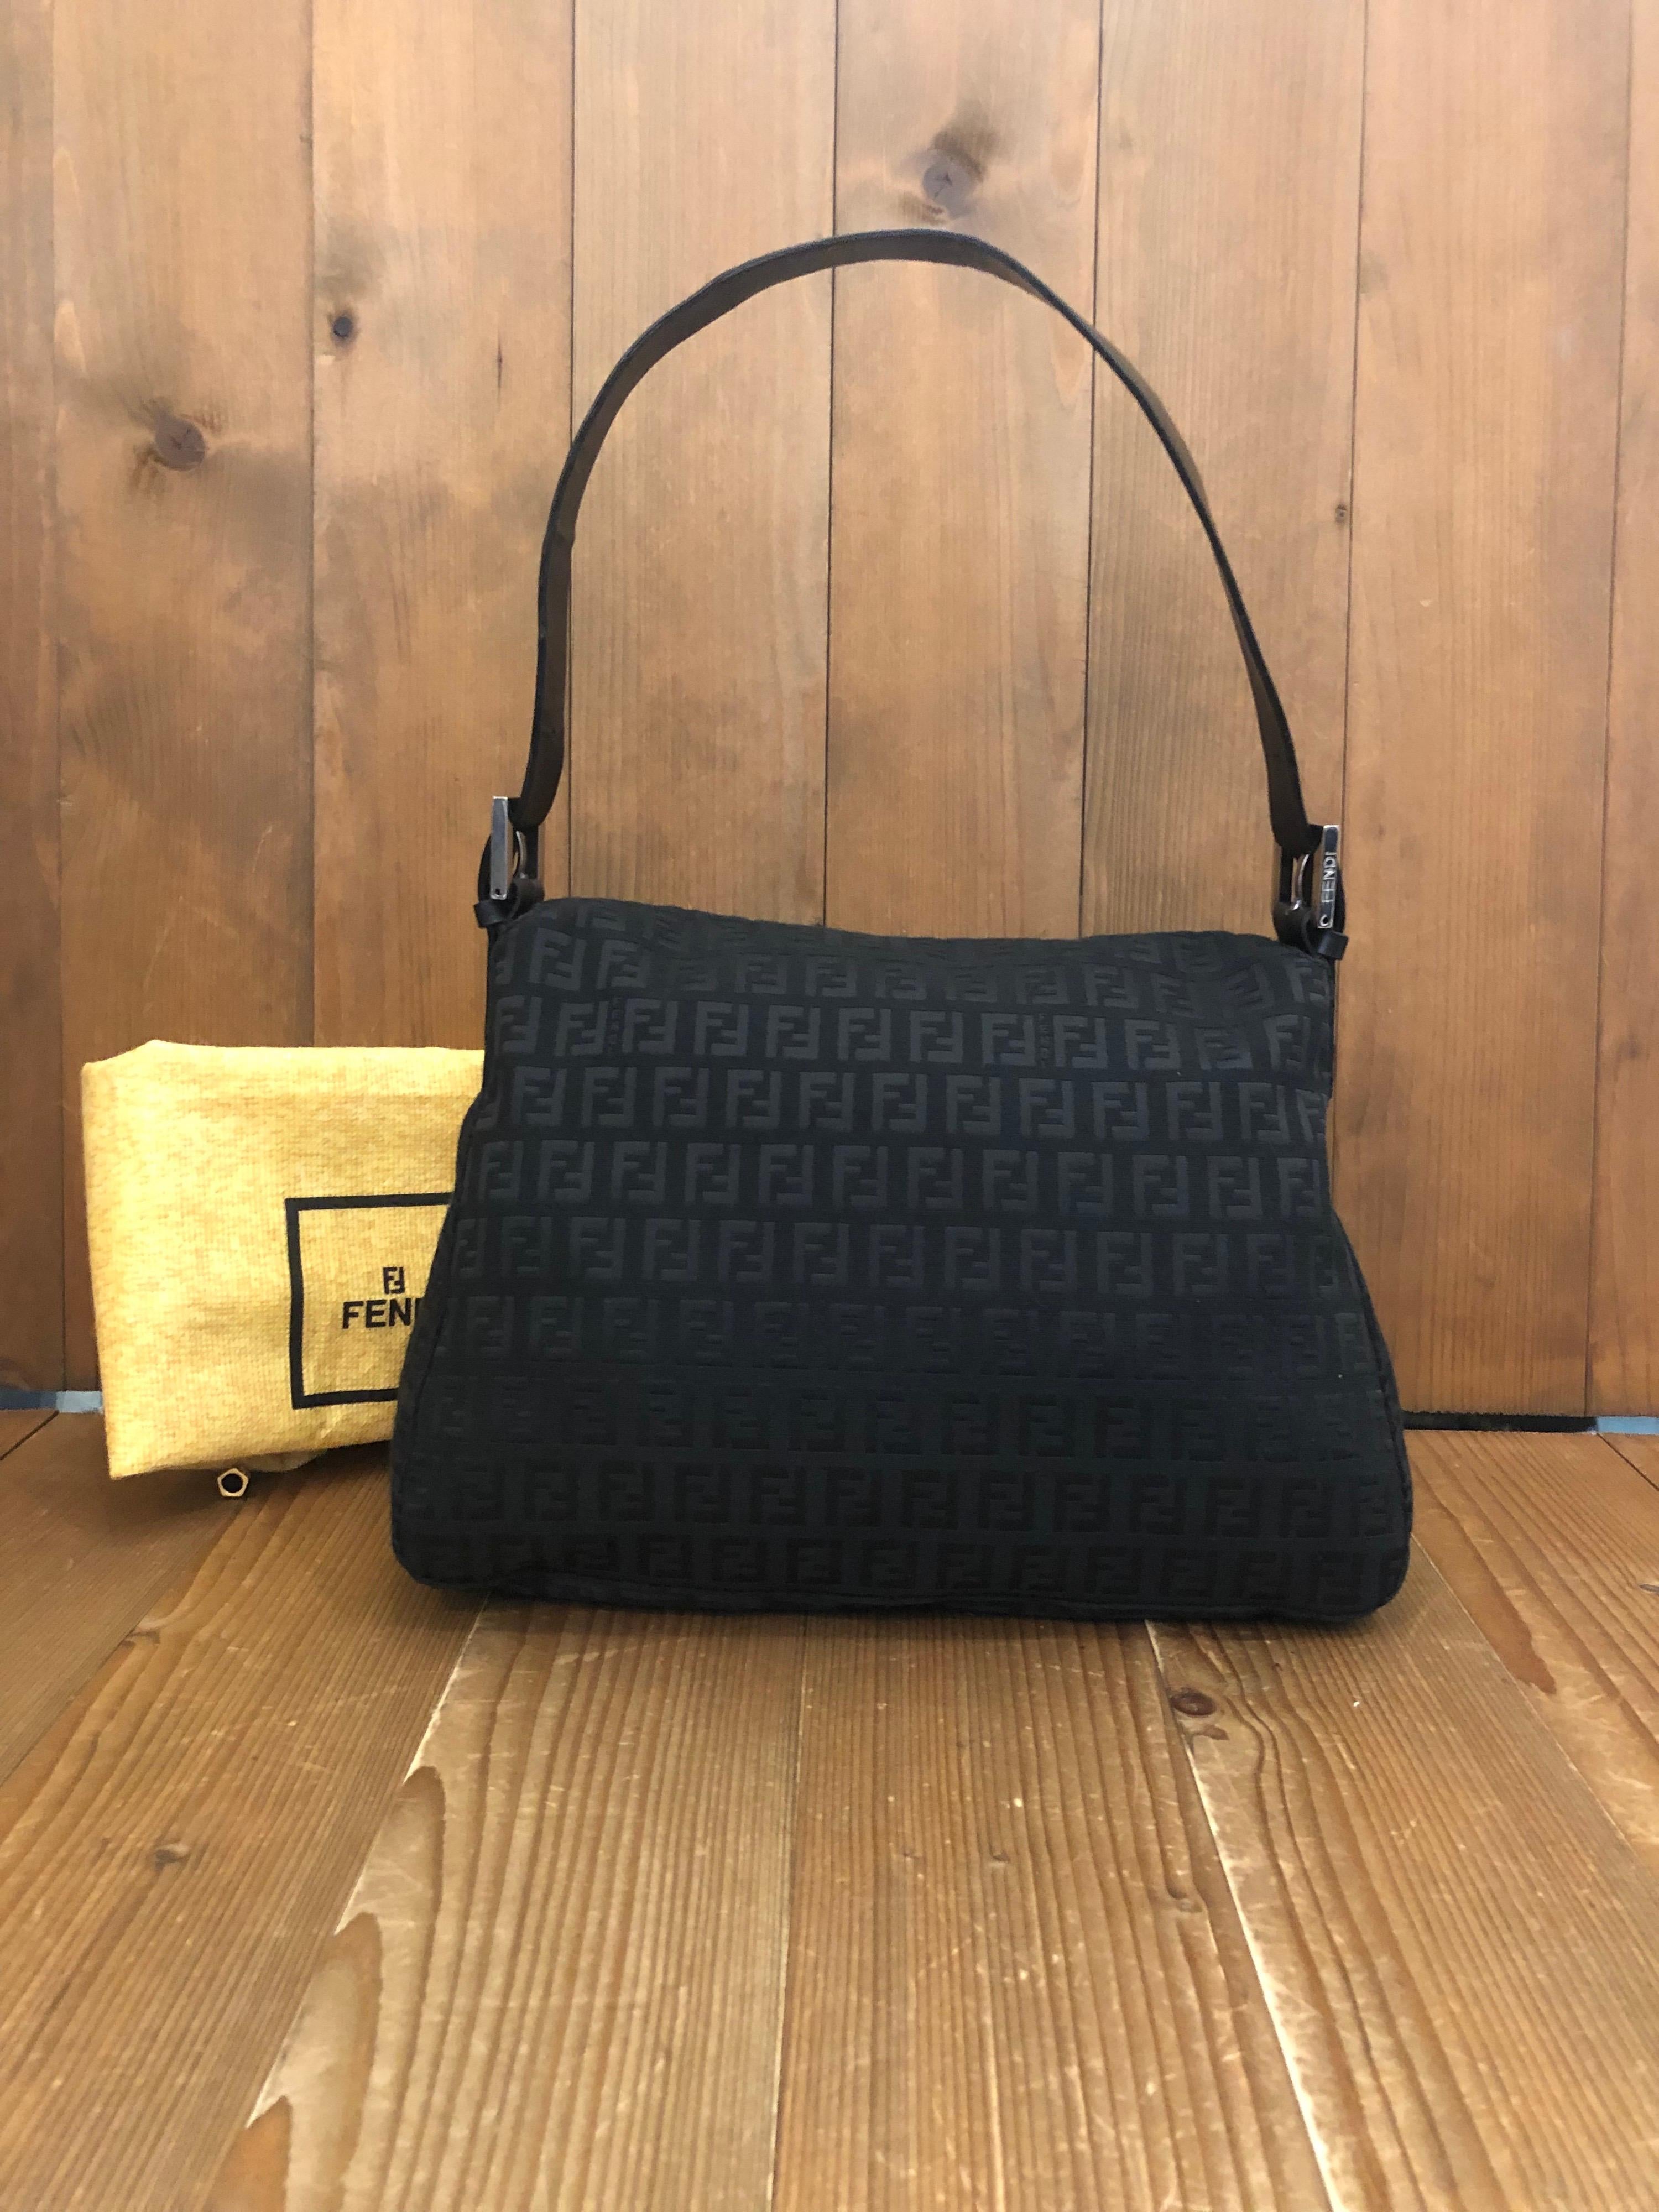 The iconic Fendi Mama Baguette handbag in black Zucchino jacquard featuring one interior zip pocket. Made in Italy. Measures 11.5 x 7.5 x 4.5 inches Handle Drop 9 inches. Comes with dustbag.

Condition - Excellent with minimal signs of wear. 